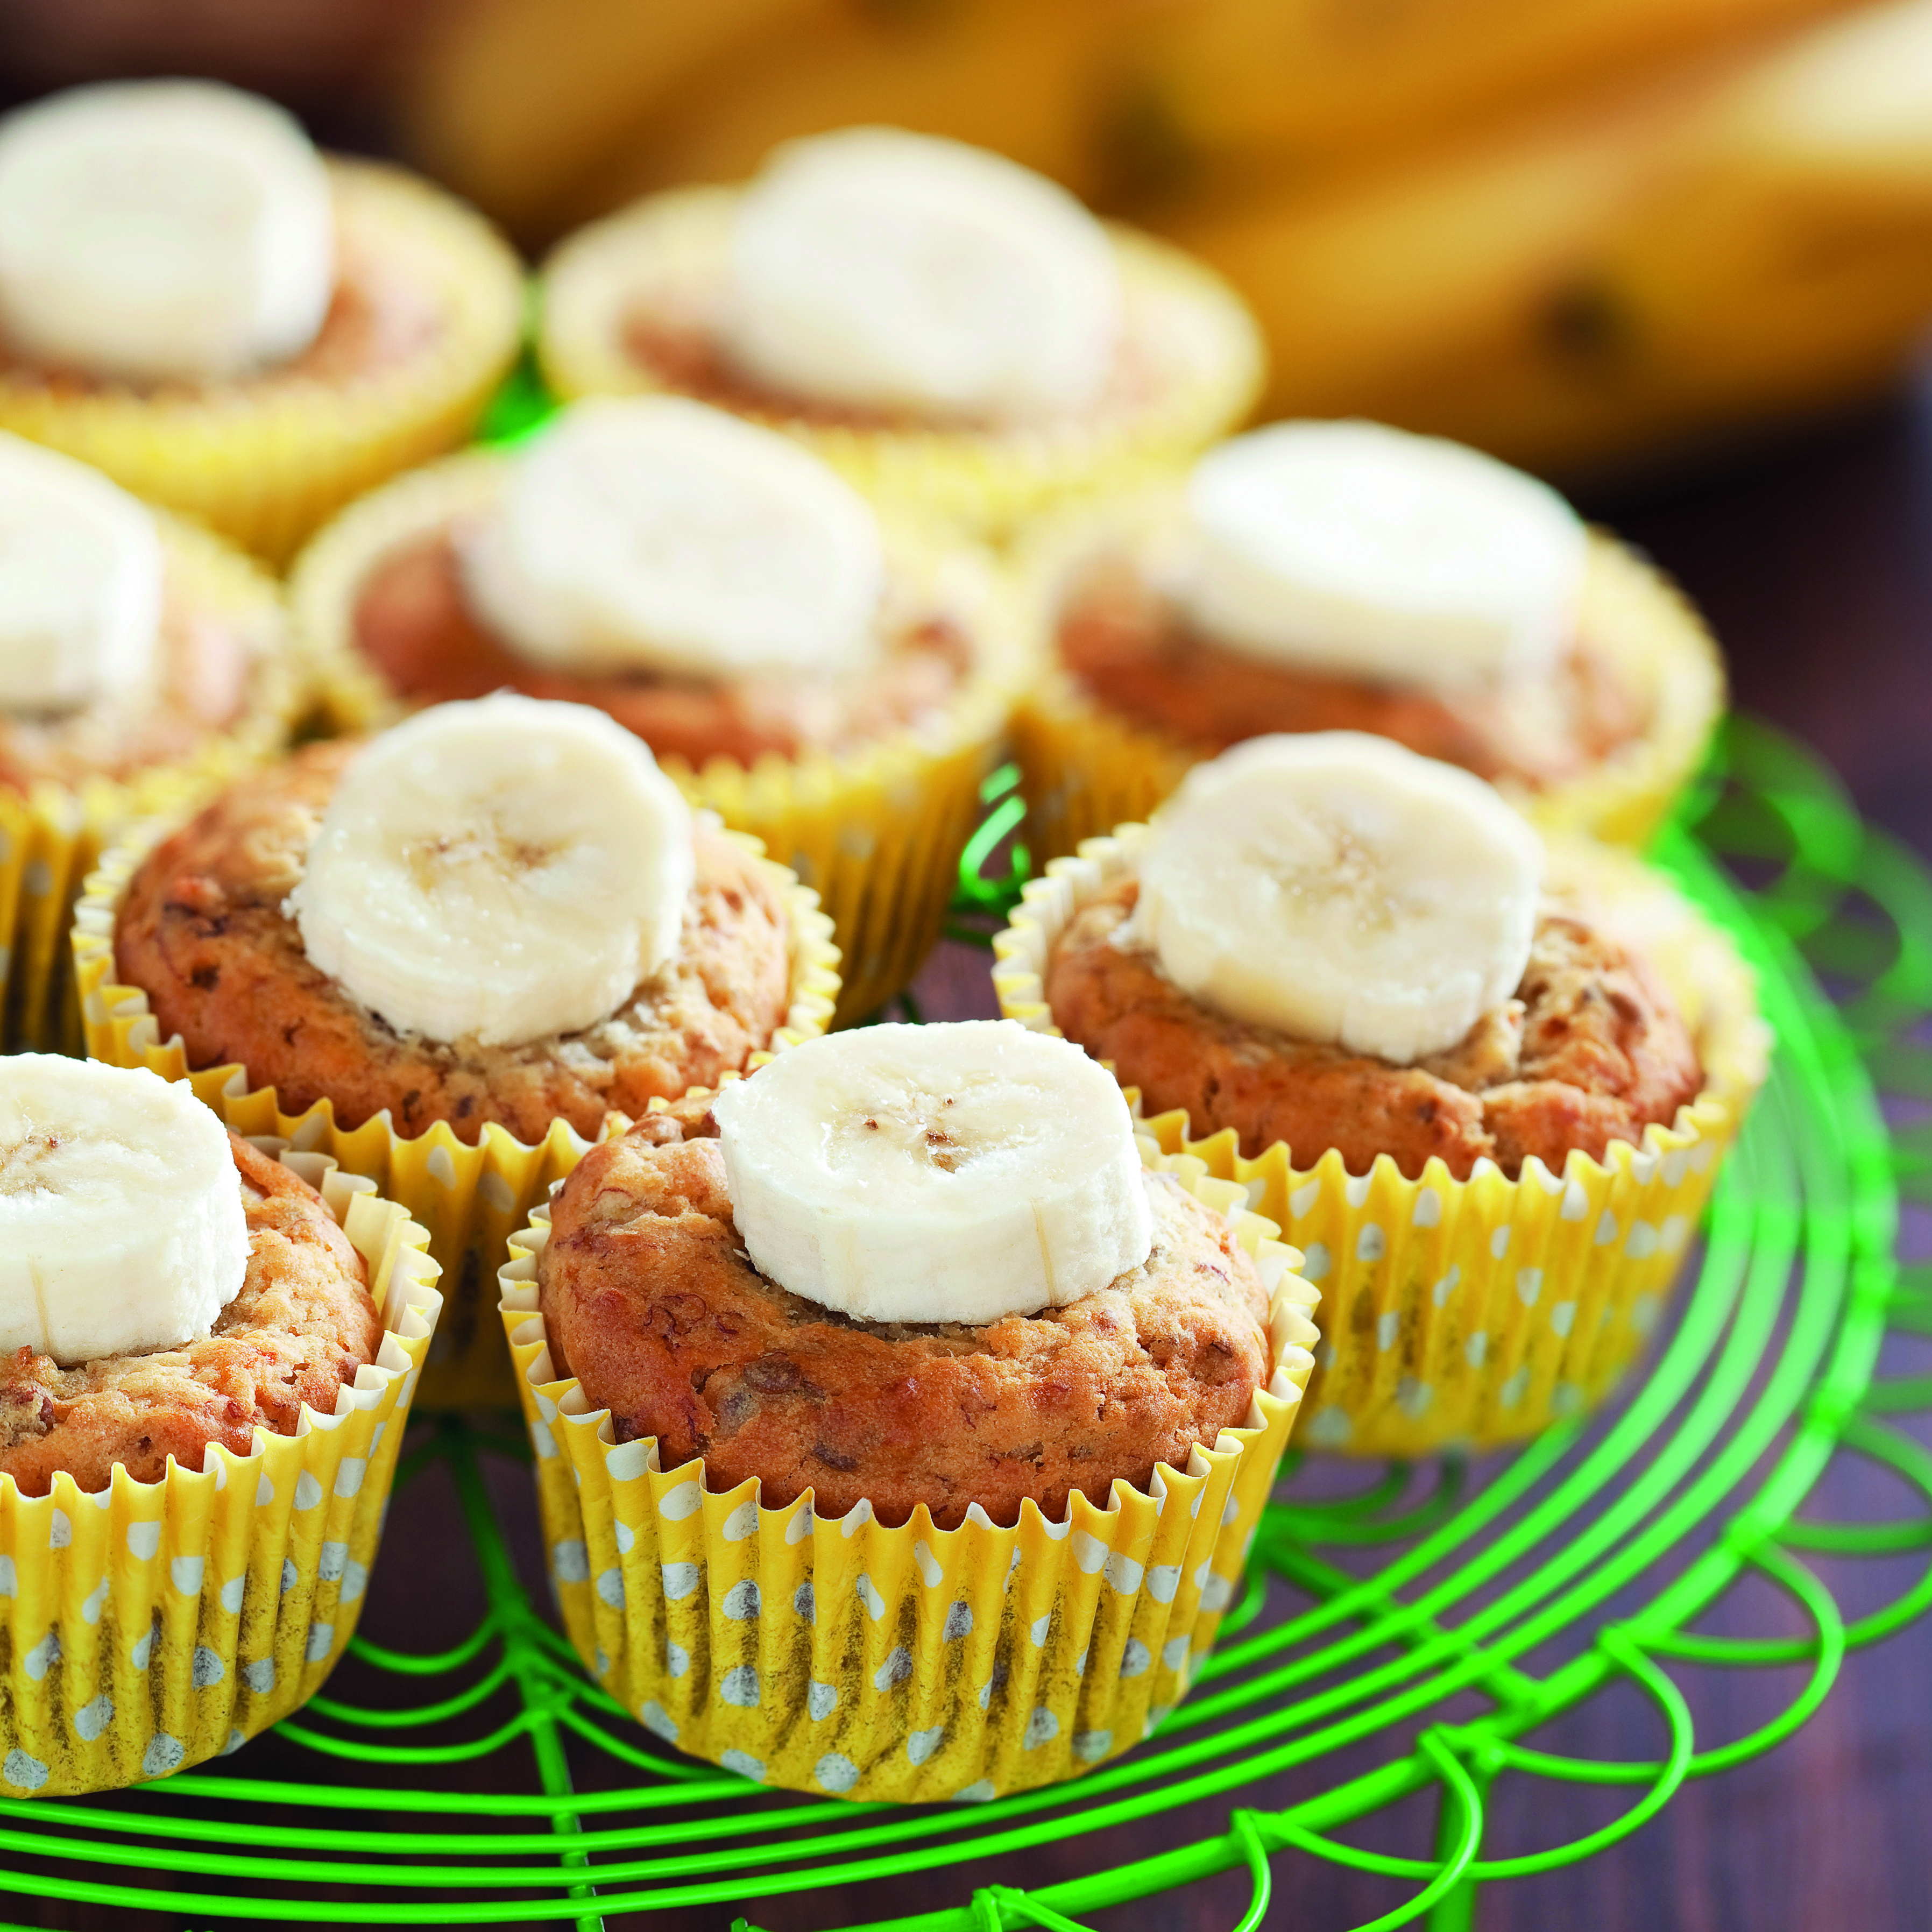 Cupcakes with a banana slice on top